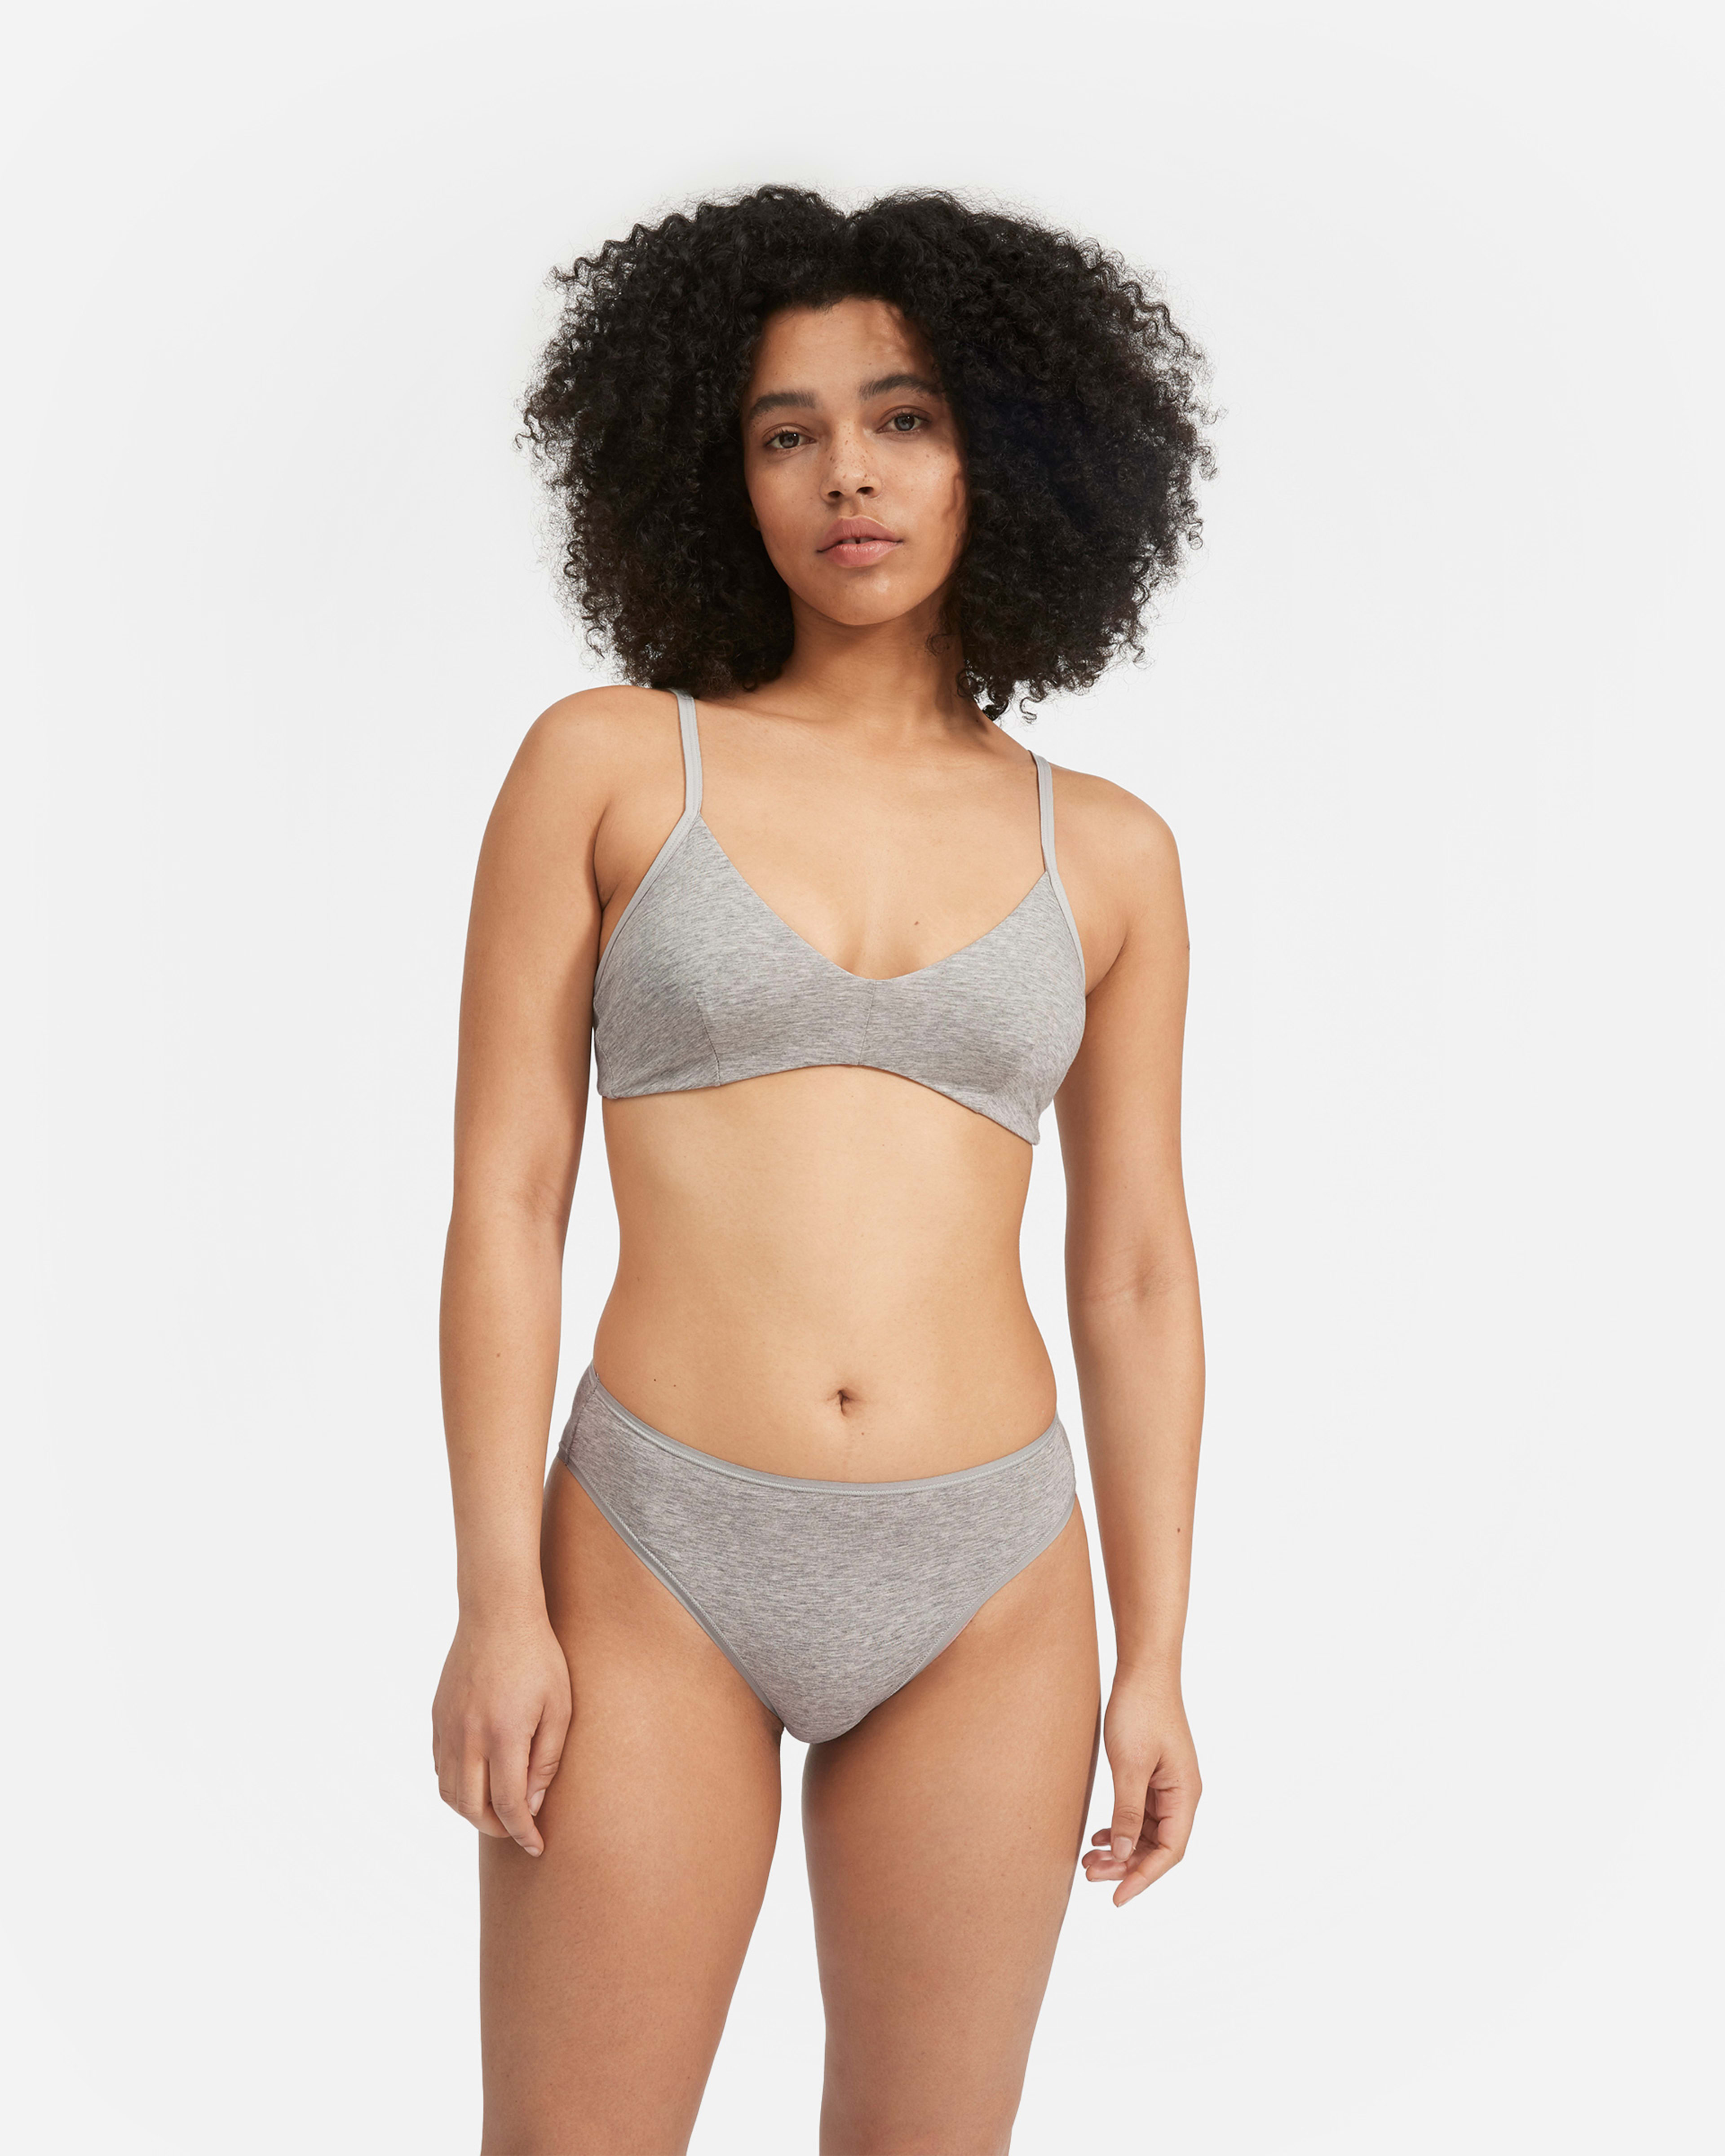 Everlane Is Making Underwear to Cover All of Your Essentials